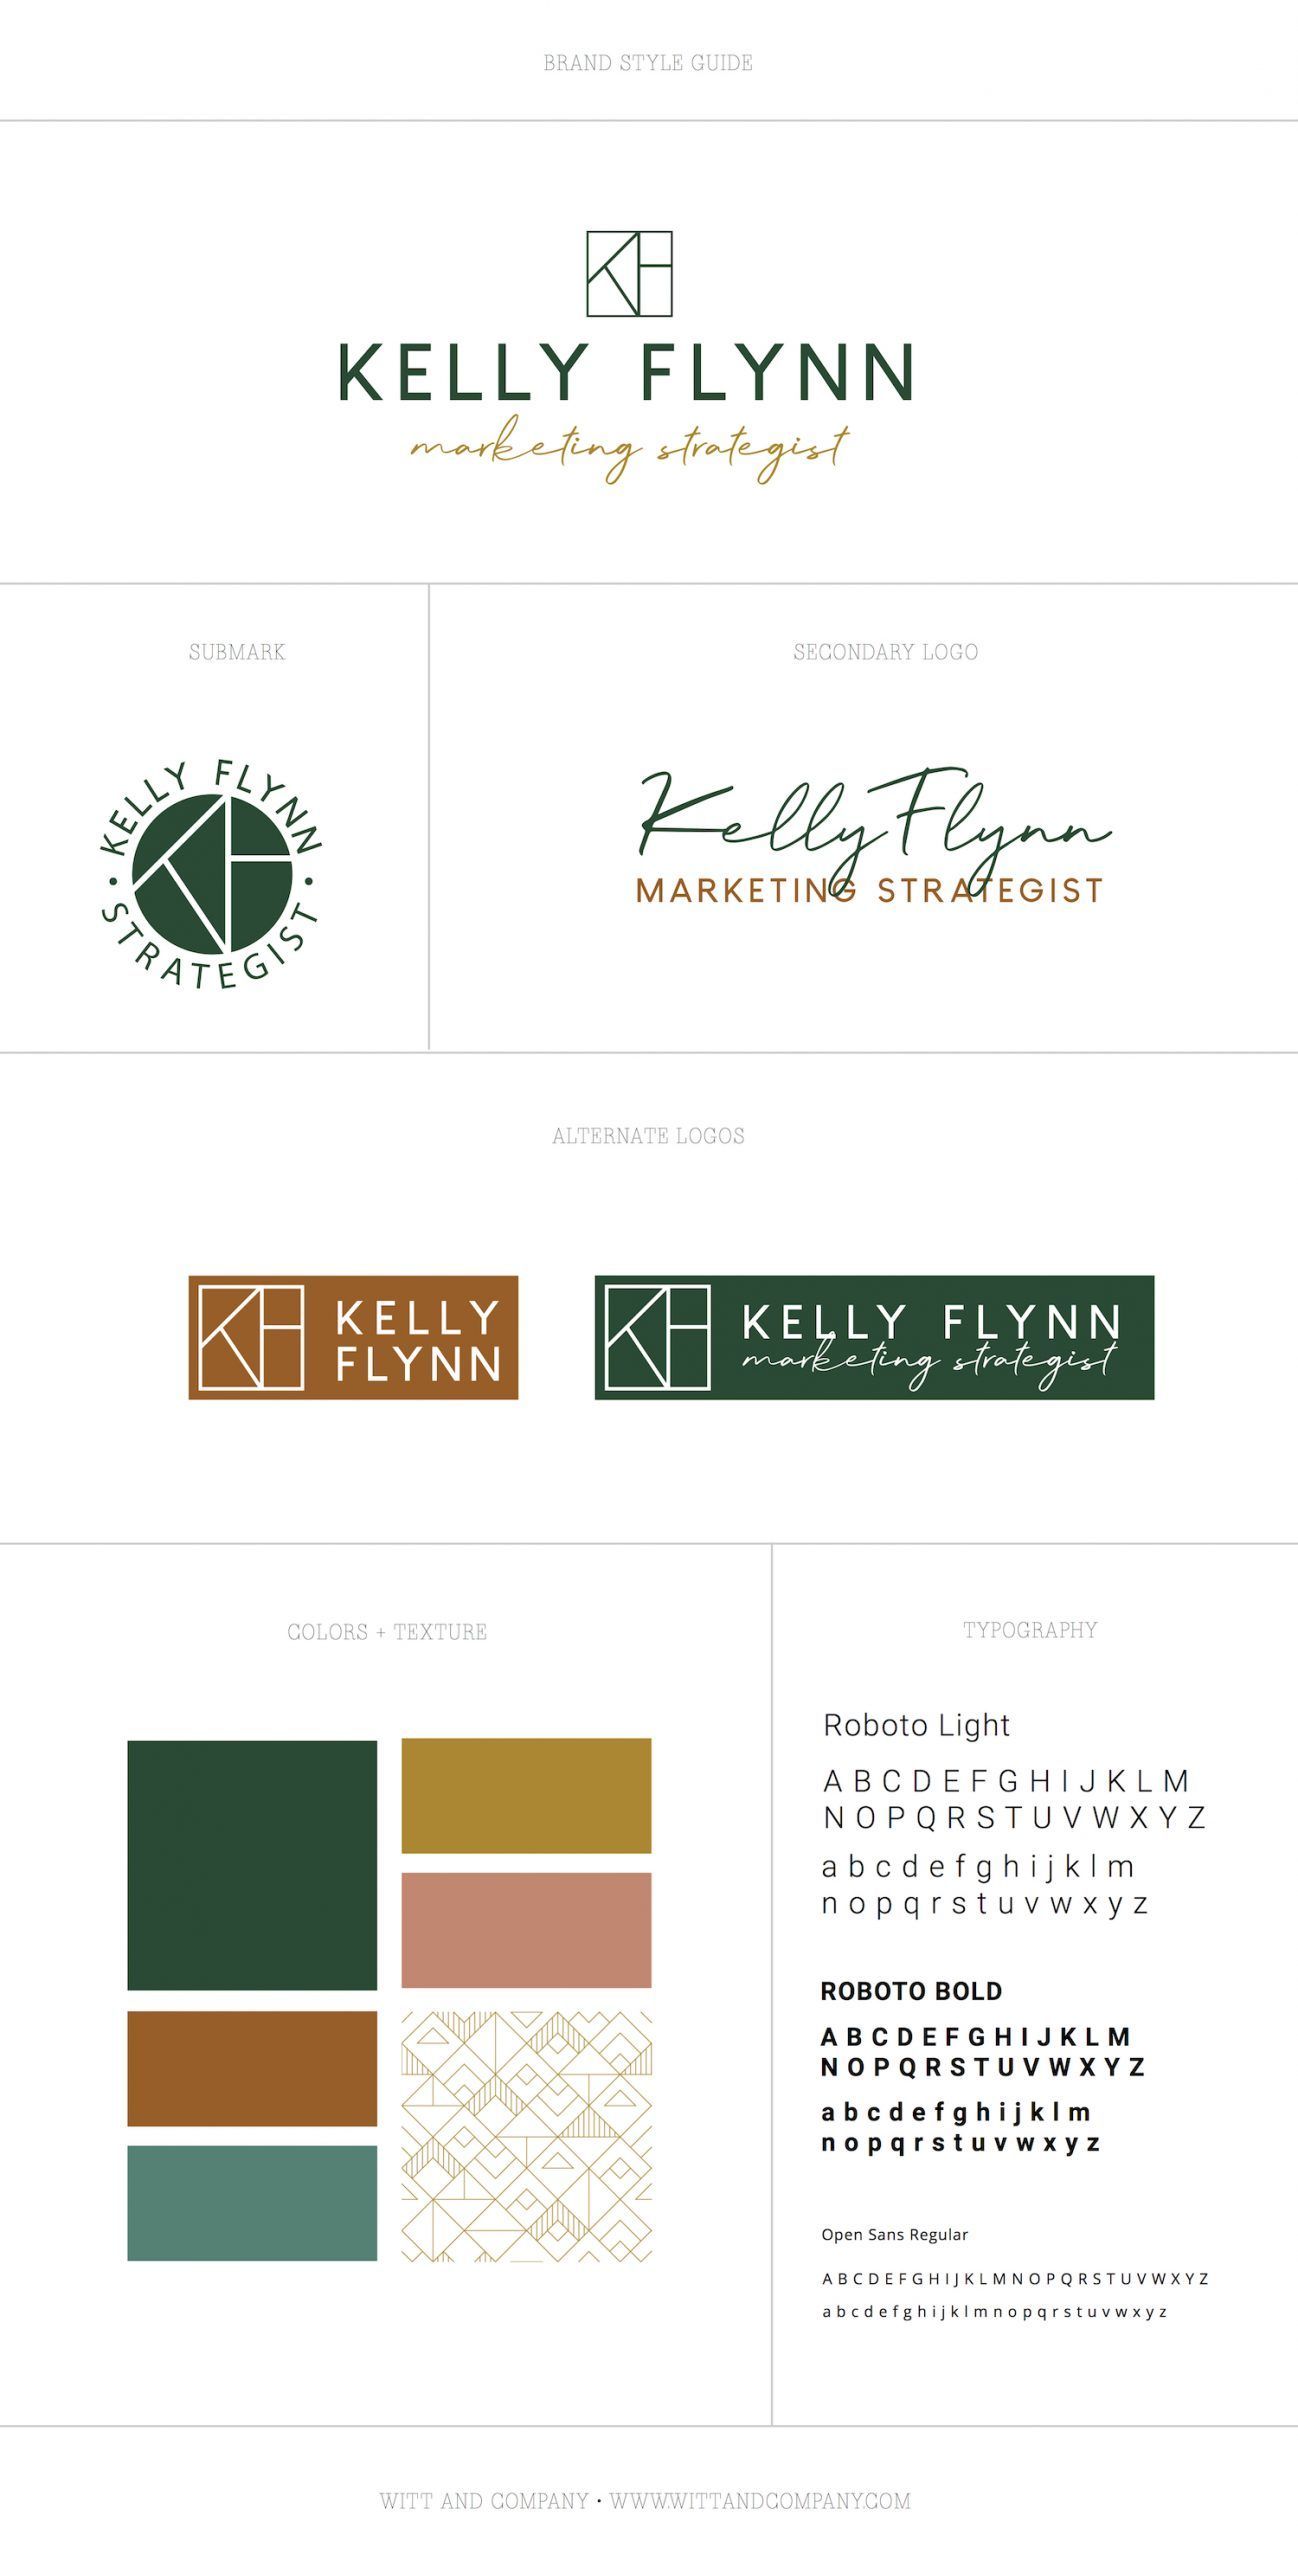 Brand Reveal + Logo Design for Kelly Flynn, Marketing Strategist by Witt and Company - Brand Reveal + Logo Design for Kelly Flynn, Marketing Strategist by Witt and Company -   23 style Guides winter ideas